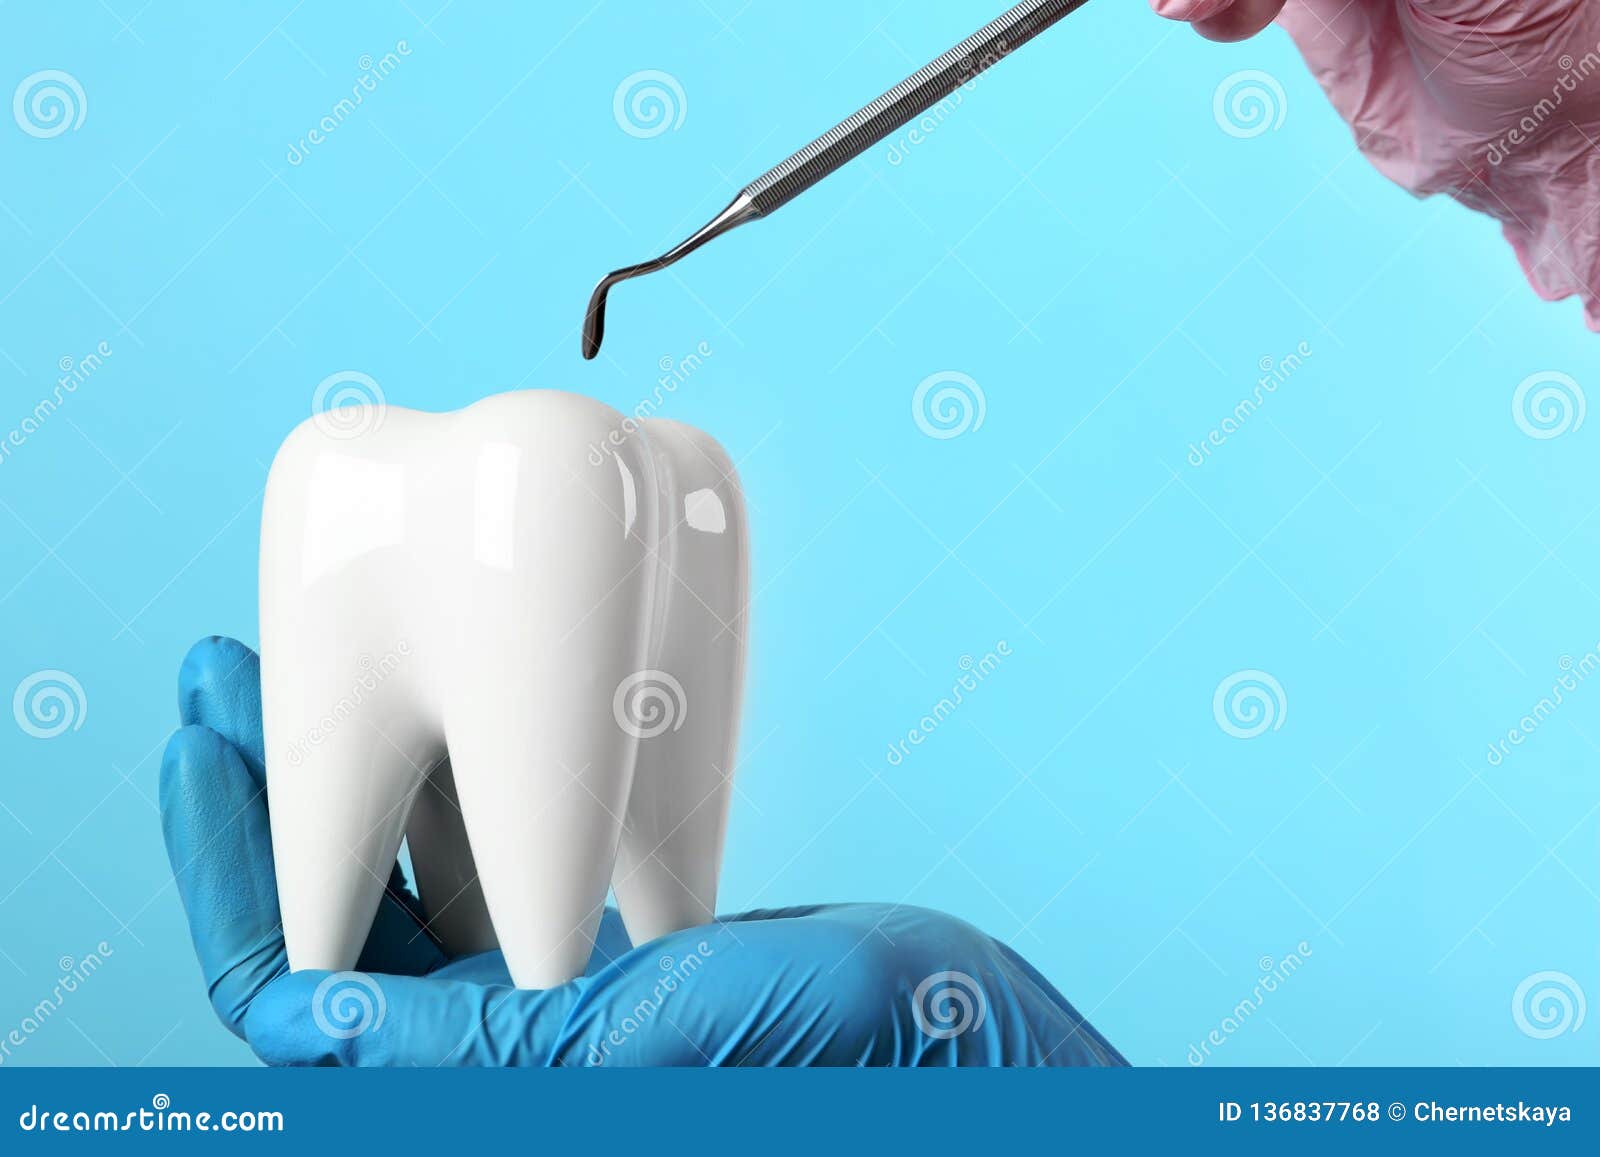 dentist holding ceramic model of tooth and professional tool on color background